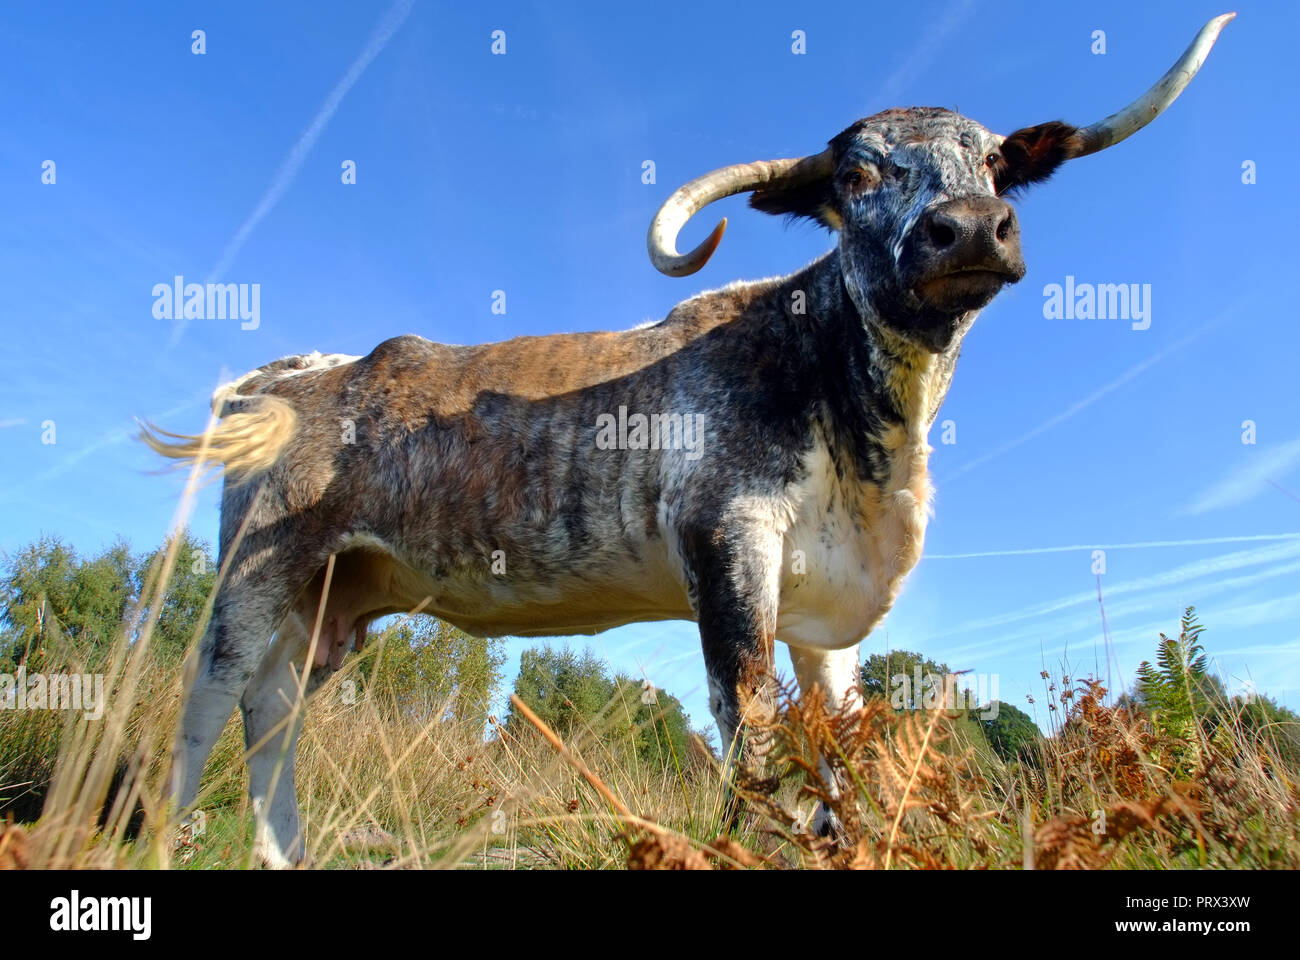 Chailey, East Sussex, 5th October 2018. English longhorn cattle grazing on Chailey Common, nature reserve, East Sussex. The cattle have been brought in especially to control trees and shurbs that are threatening the grazing areas of the comon. ©Peter Cripps/Alamy Live News Stock Photo